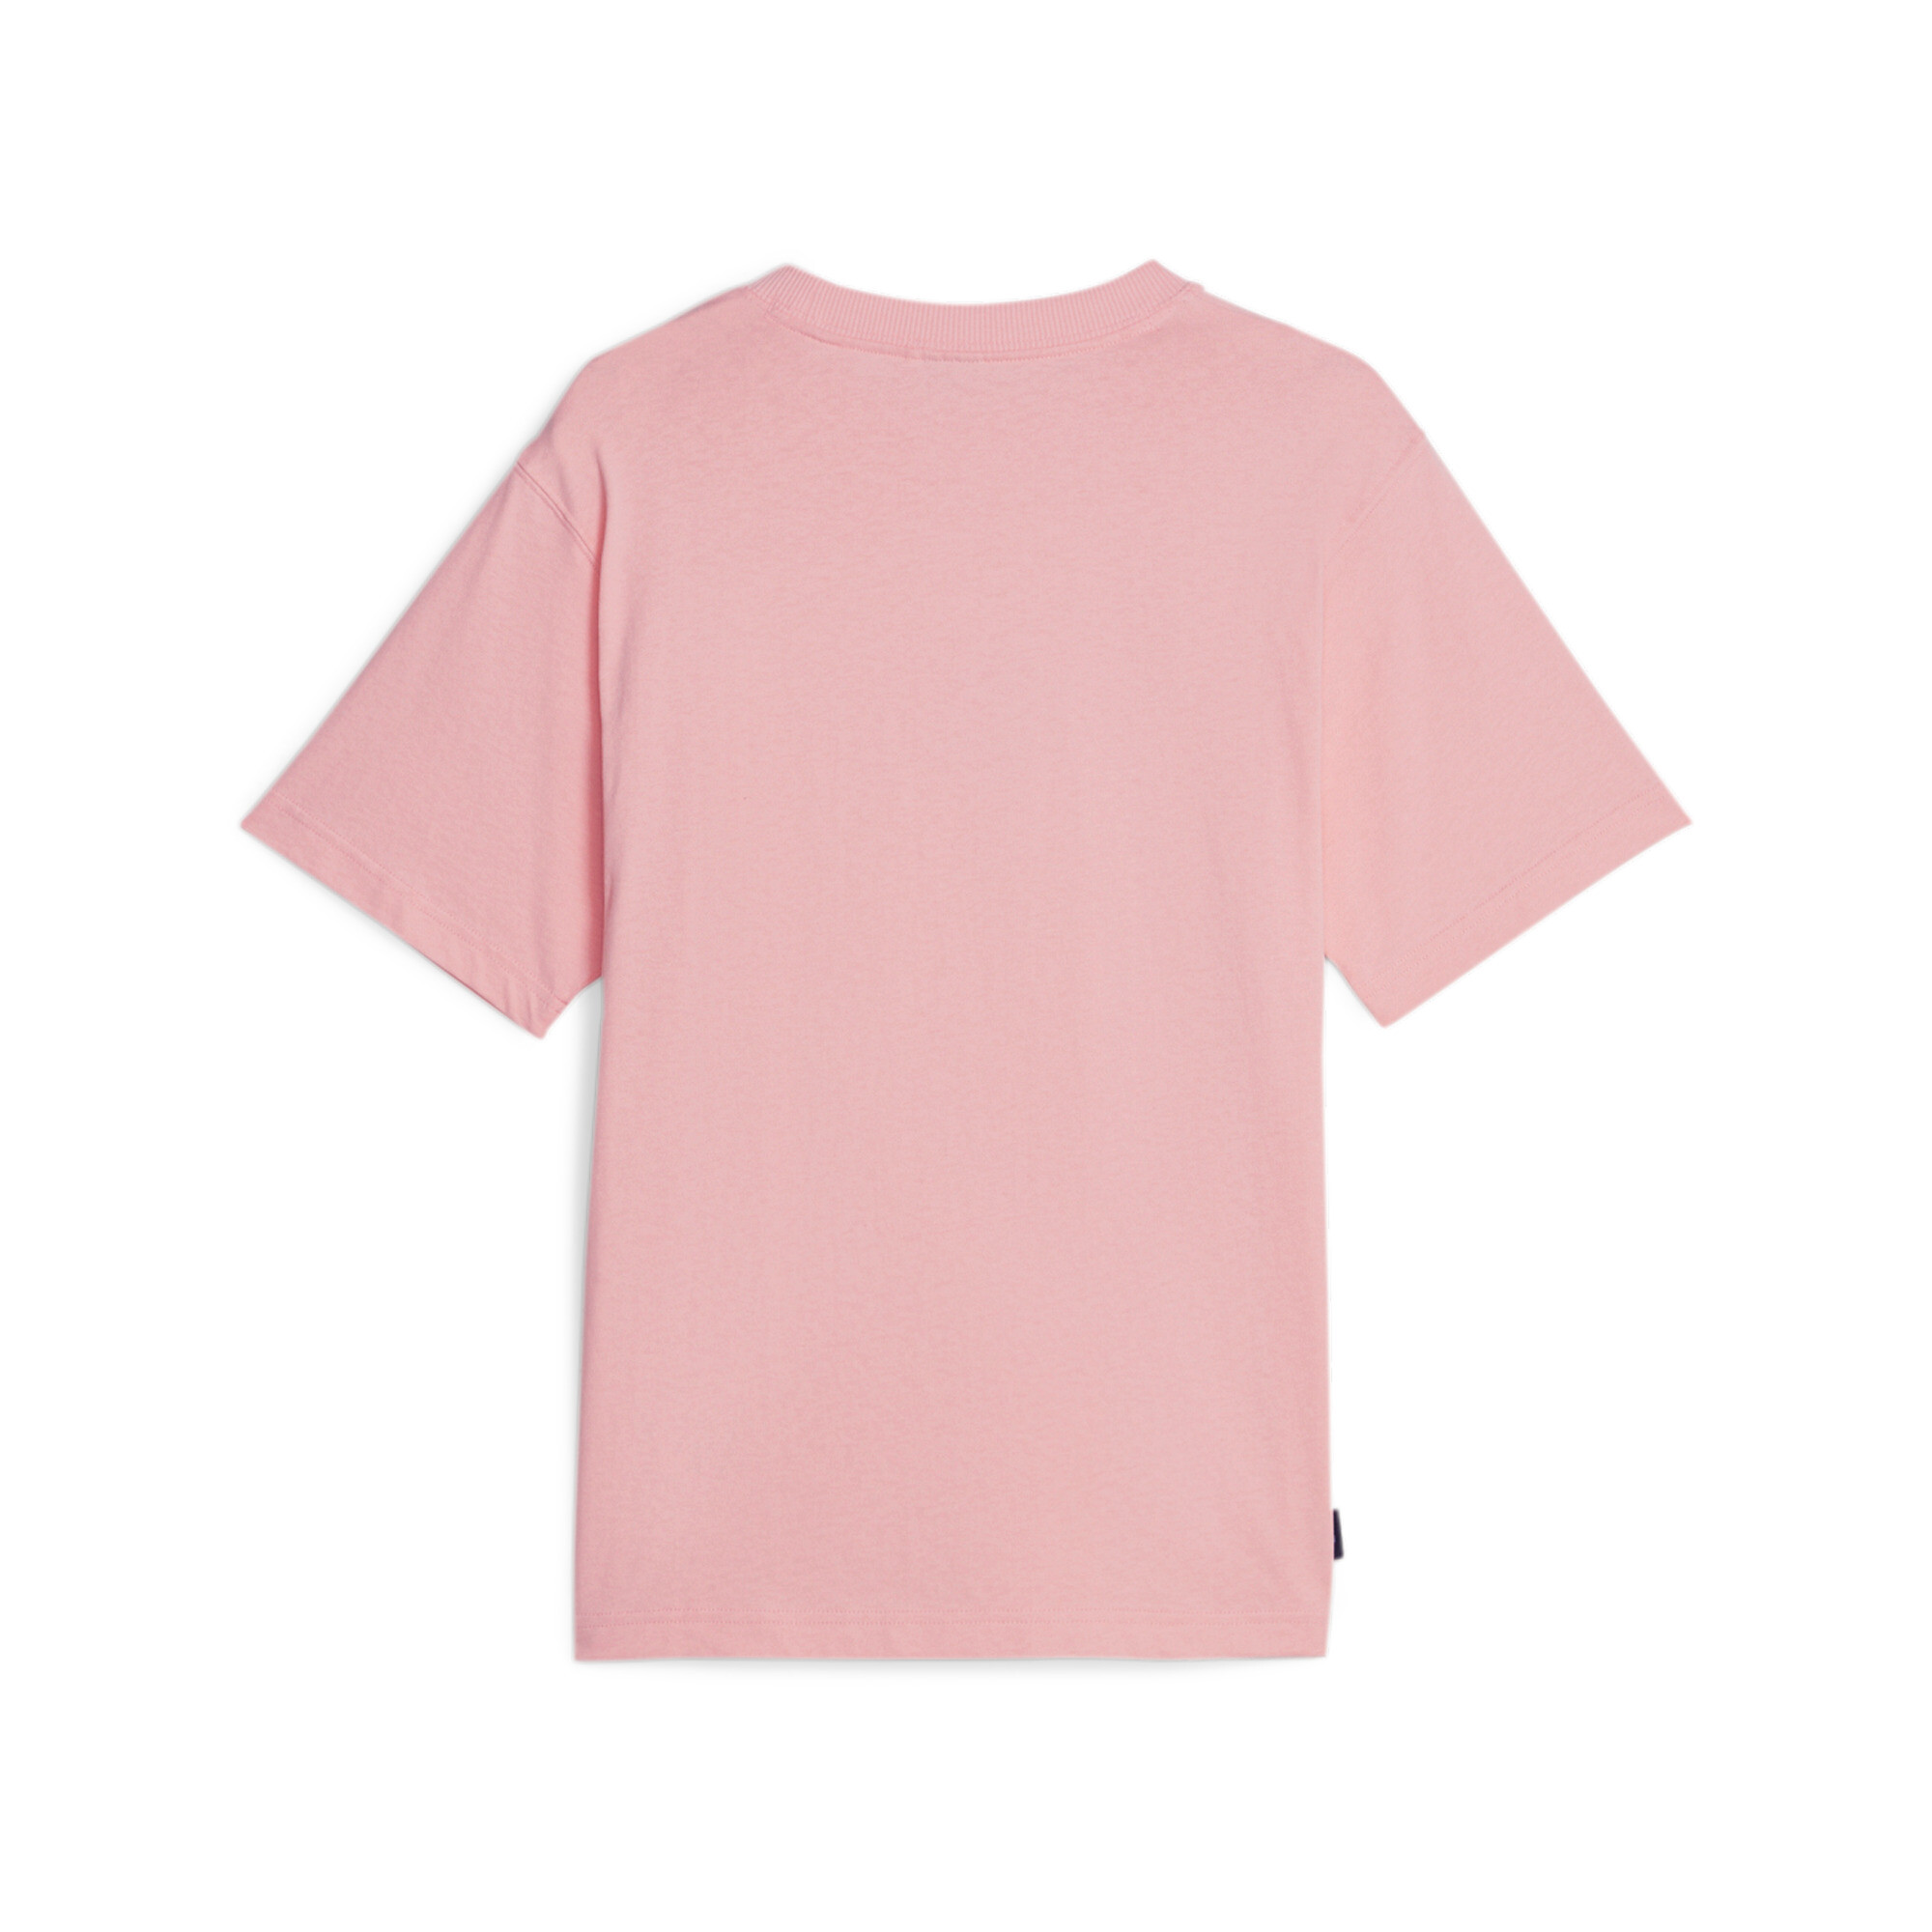 Women's PUMA DOWNTOWN Graphic T-Shirt In Pink, Size XS